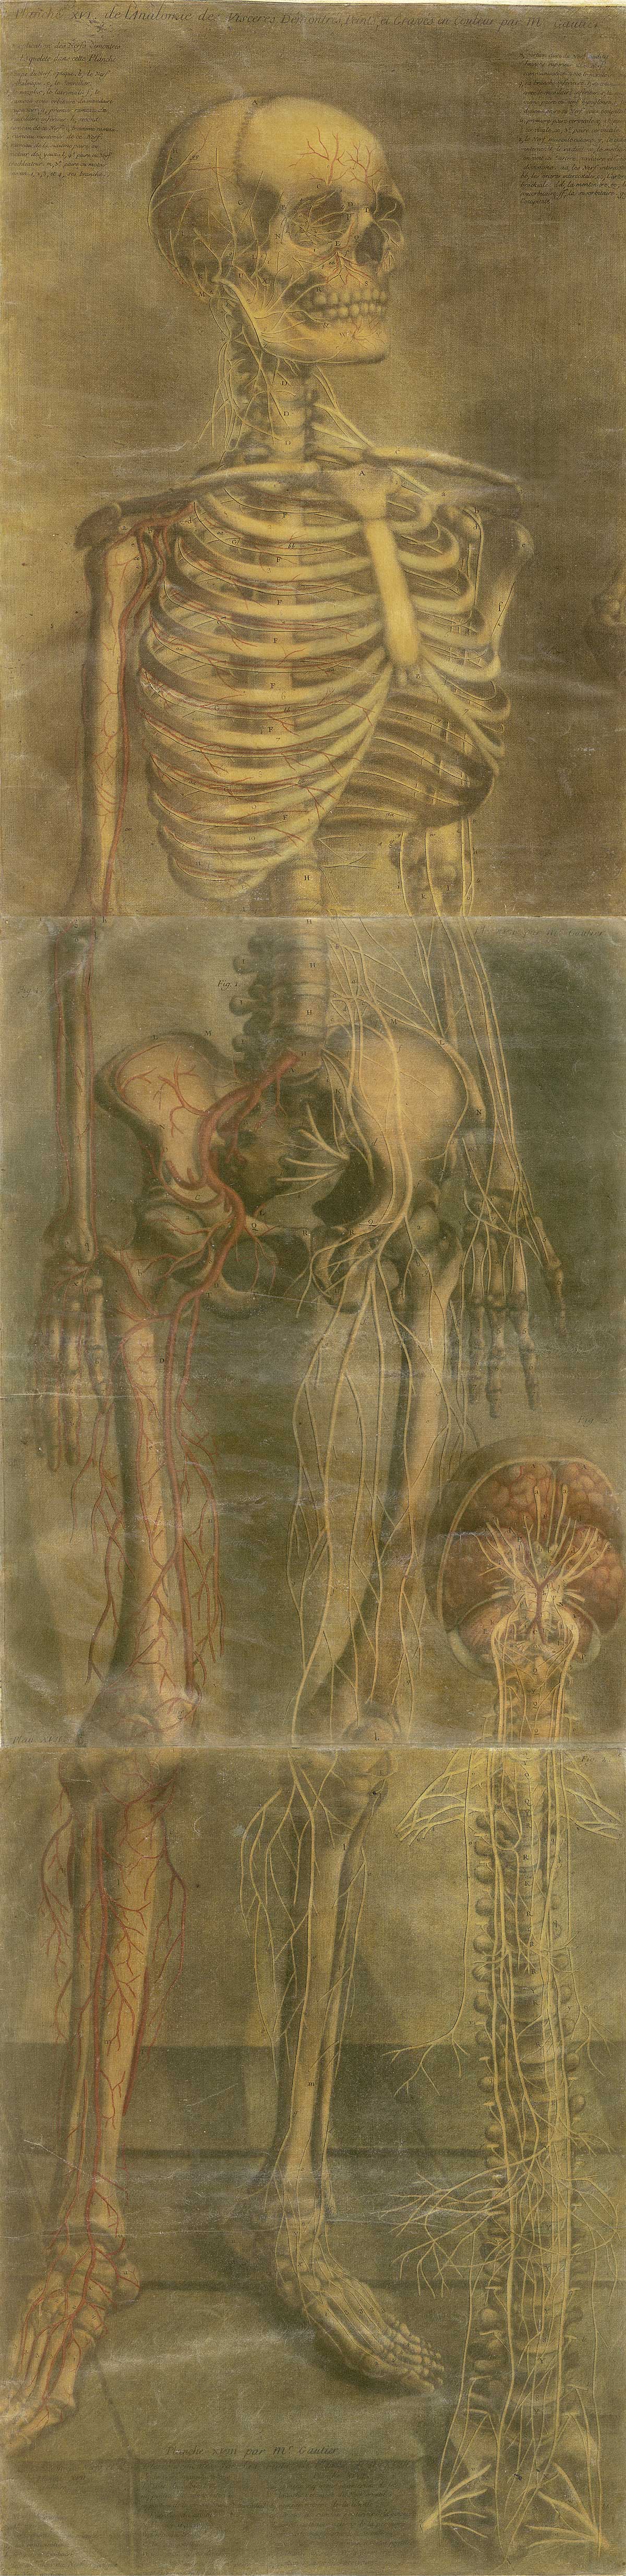 Large color mezzotint of a facing skeleton turned about forty five drees to the right with a brain and spinal cord in the lower right half of the page; from Jacques Fabian Gautier d’Agoty’s Anatomie générale des viscères en situation, NLM Call no.: WZ 260 G283c 1745.